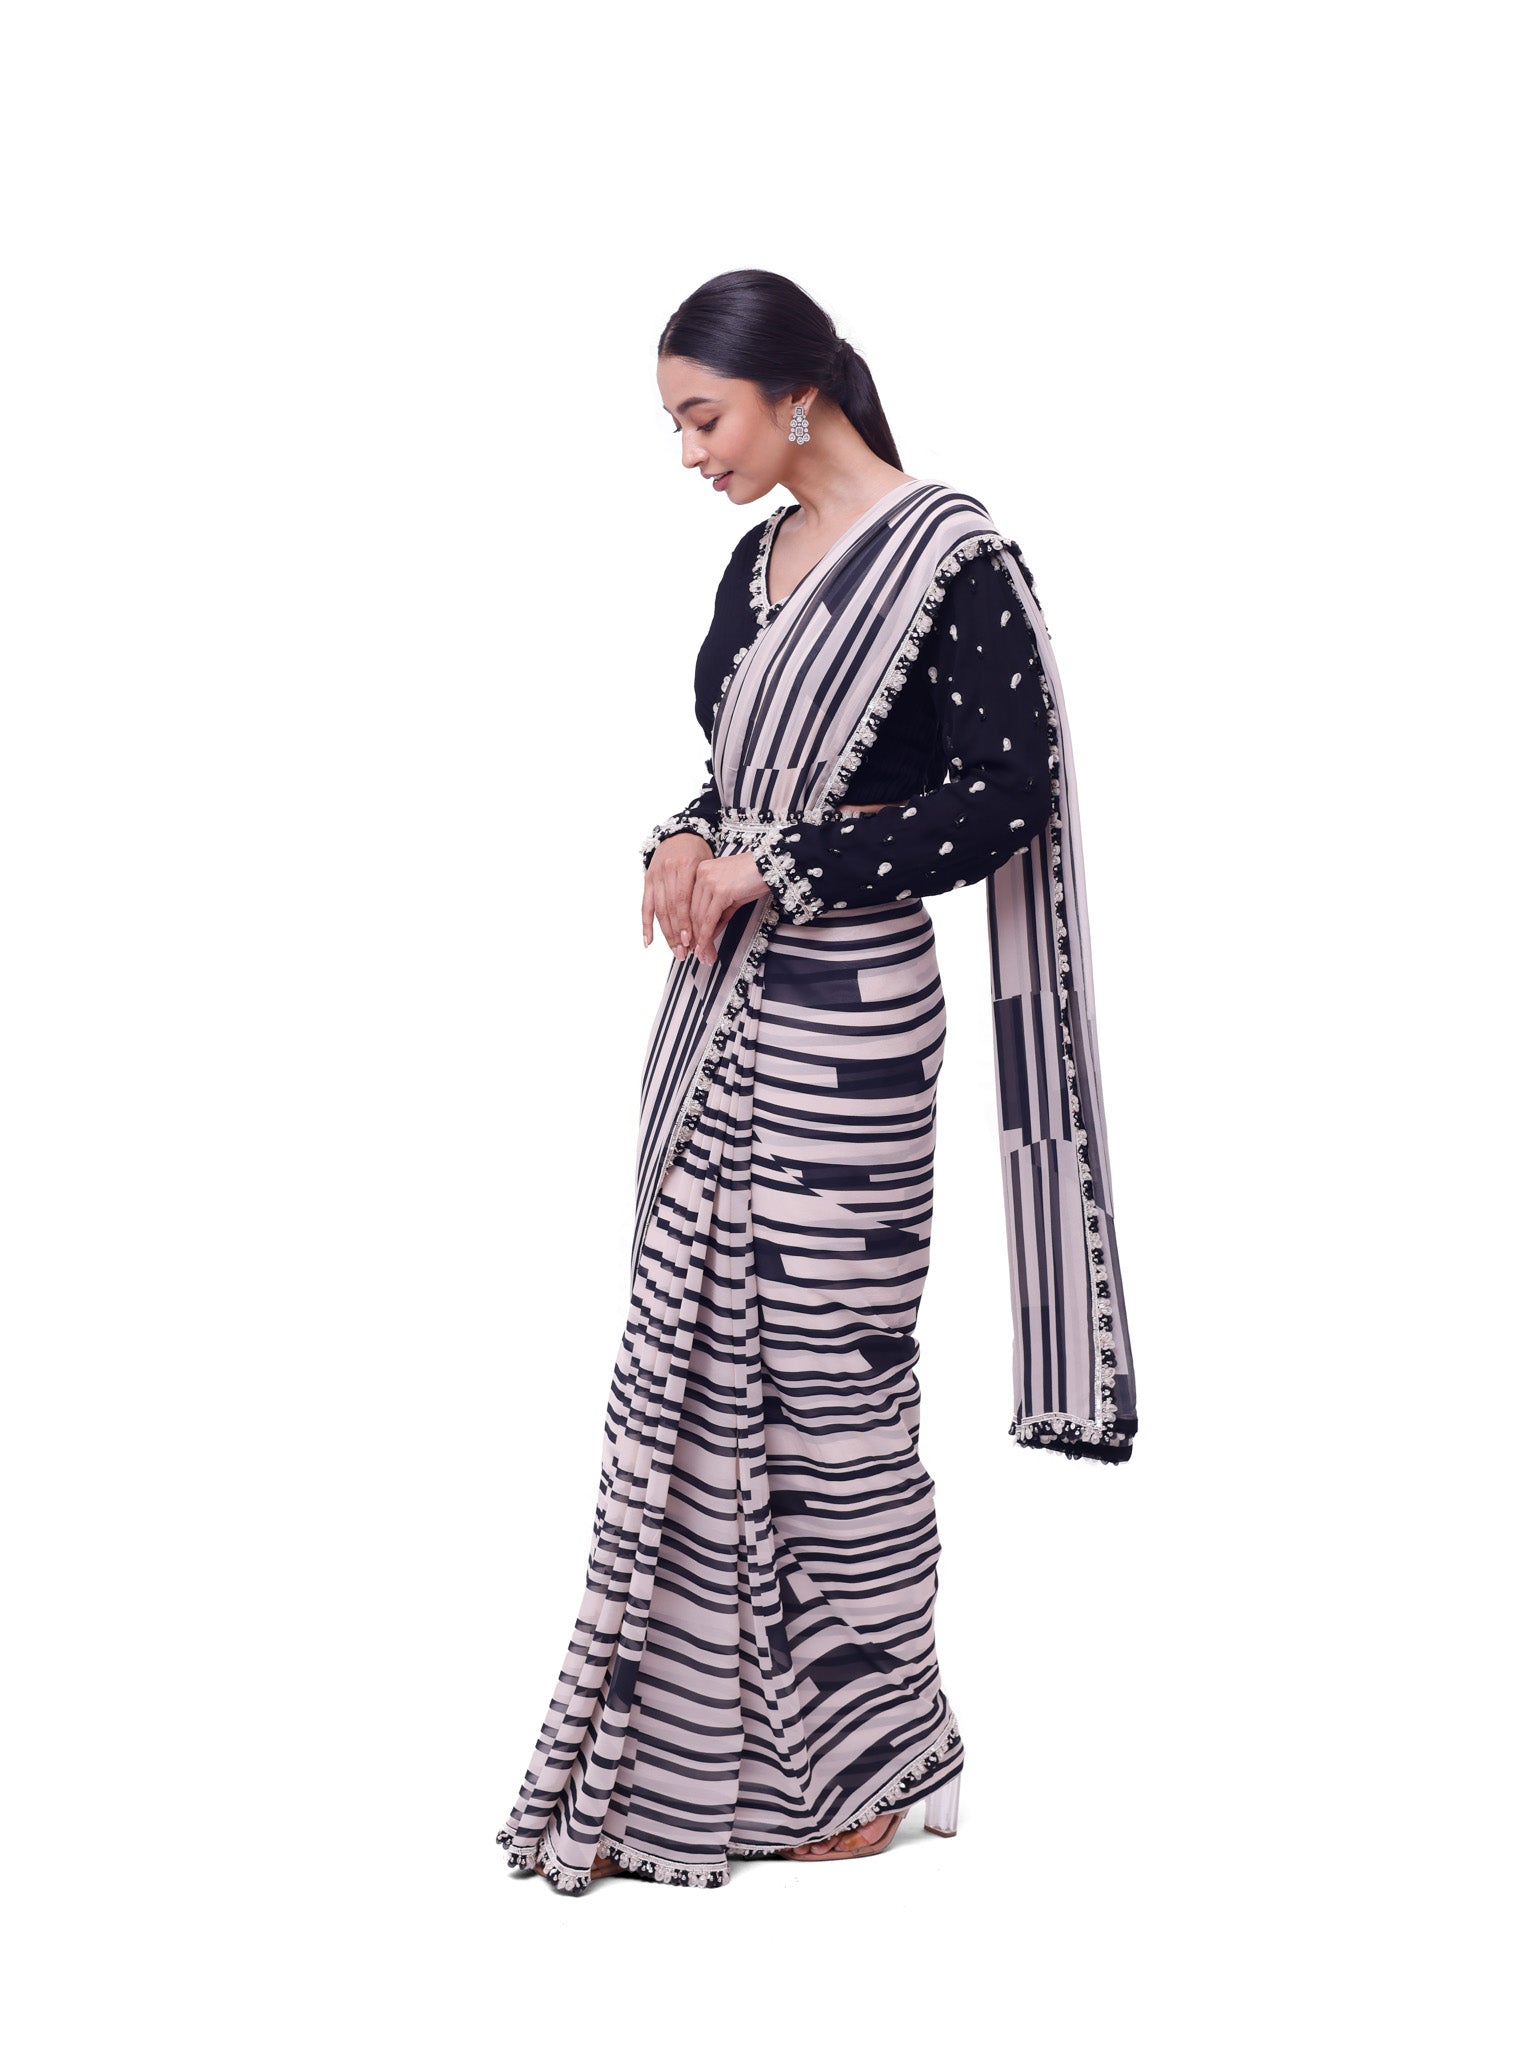 Buy white and black stripes georgette saree online in USA with black blouse. Look like a royalty in exquisite designer sarees, embroidered sarees, handwoven sarees, pure silk saris, Banarasi sarees, Kanjivaram sarees from Pure Elegance Indian saree store in USA.-side